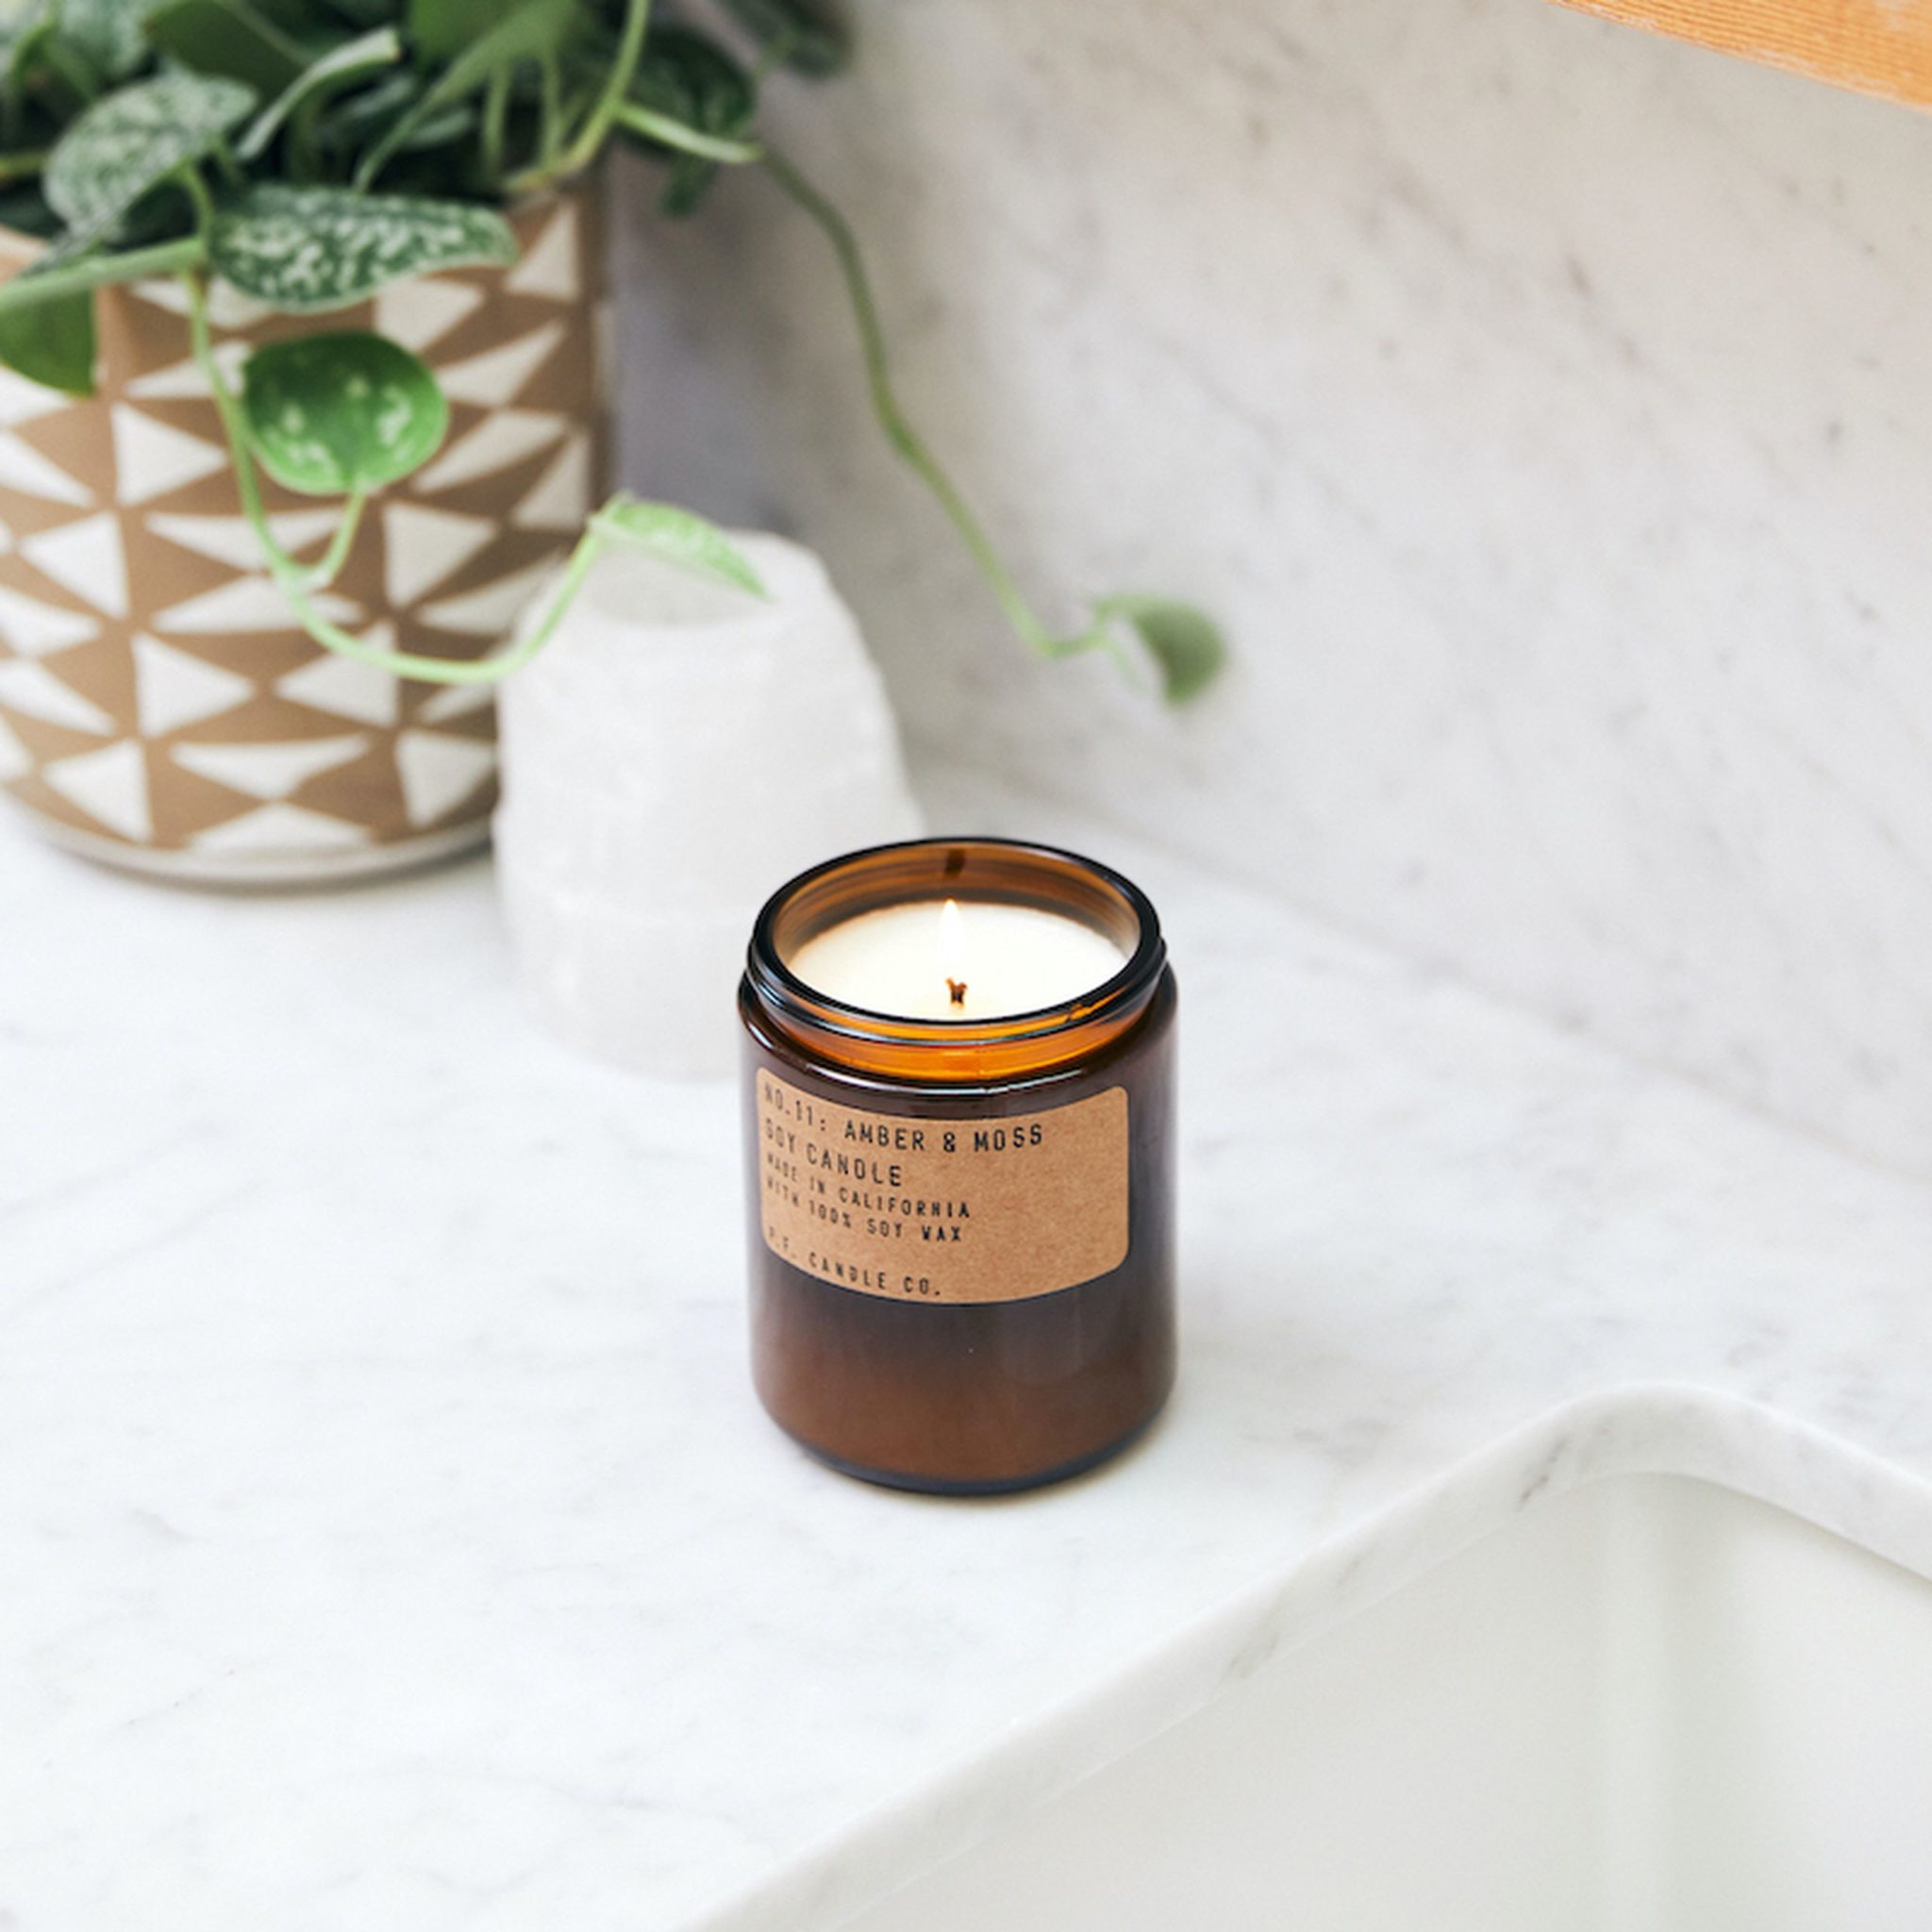 PF Candle Co No 11 Amber Moss 72 oz Soy Candle 2